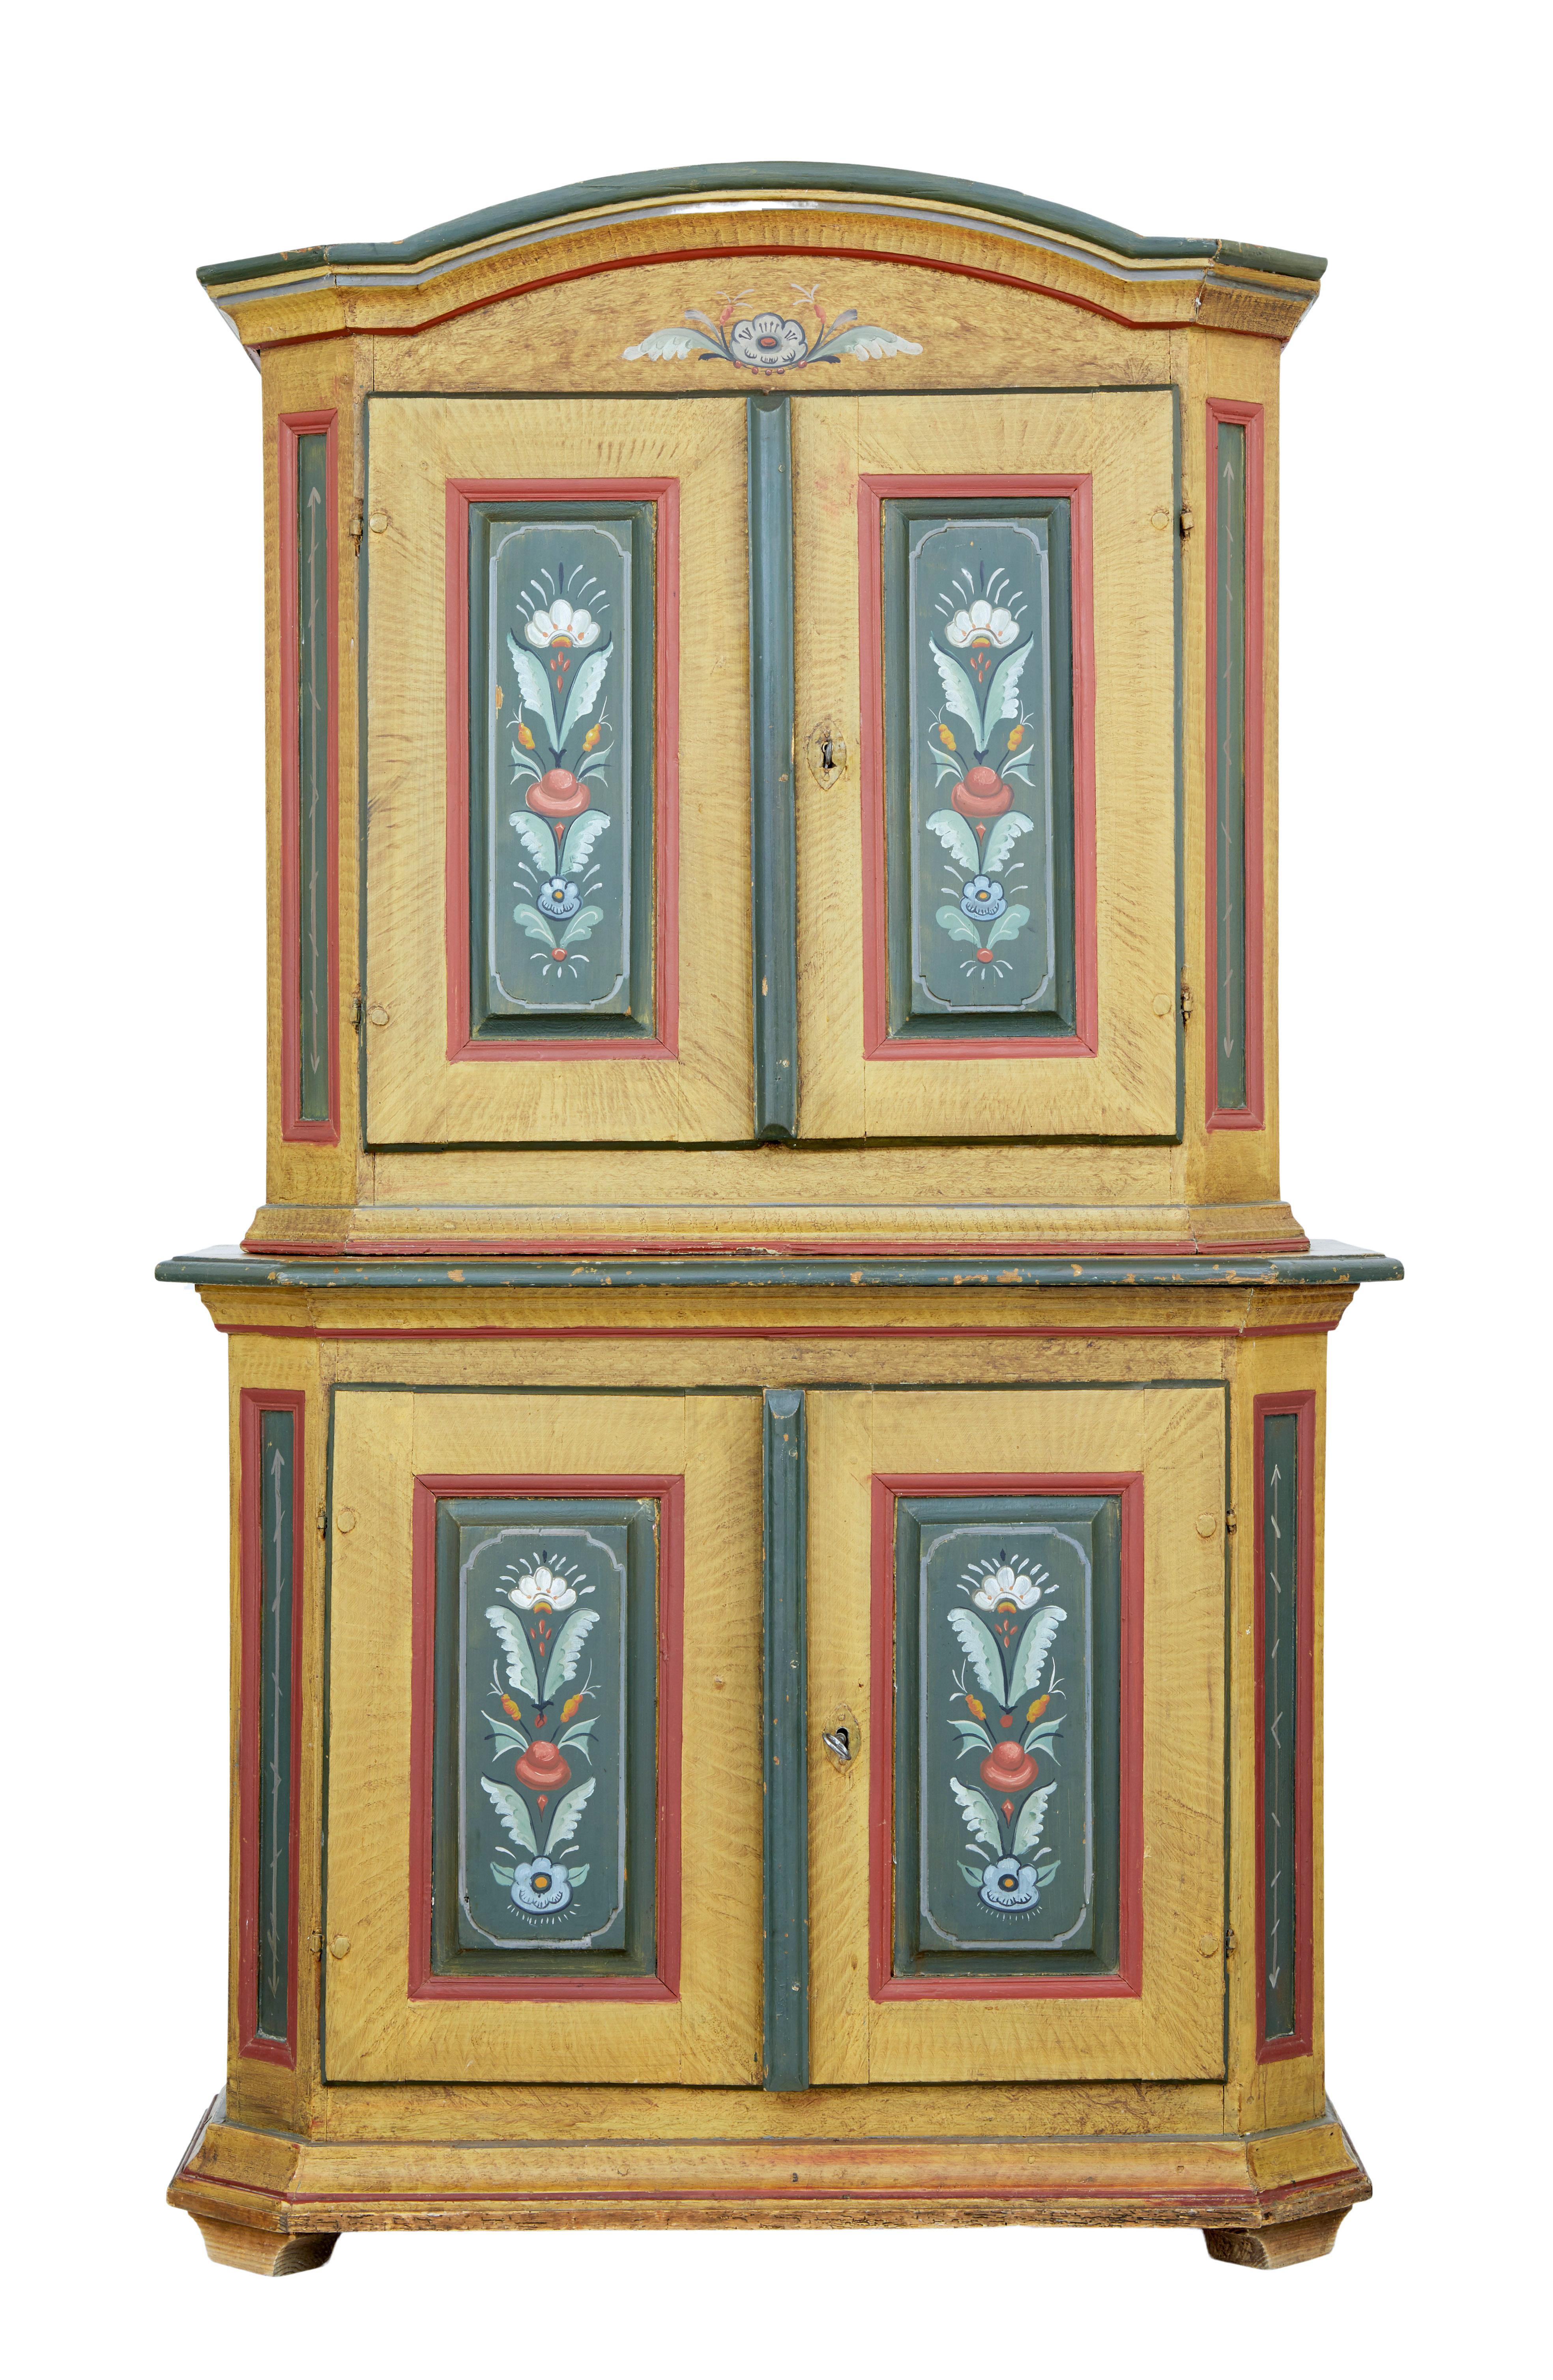 Fine piece of traditional hand painted Swedish furniture circa 1860.

2 part piece of rustic Swedish cabinet work. Top section with double doors which open to a plate rack and 2 fixed position shelves. Bottom section with a further 2 fixed